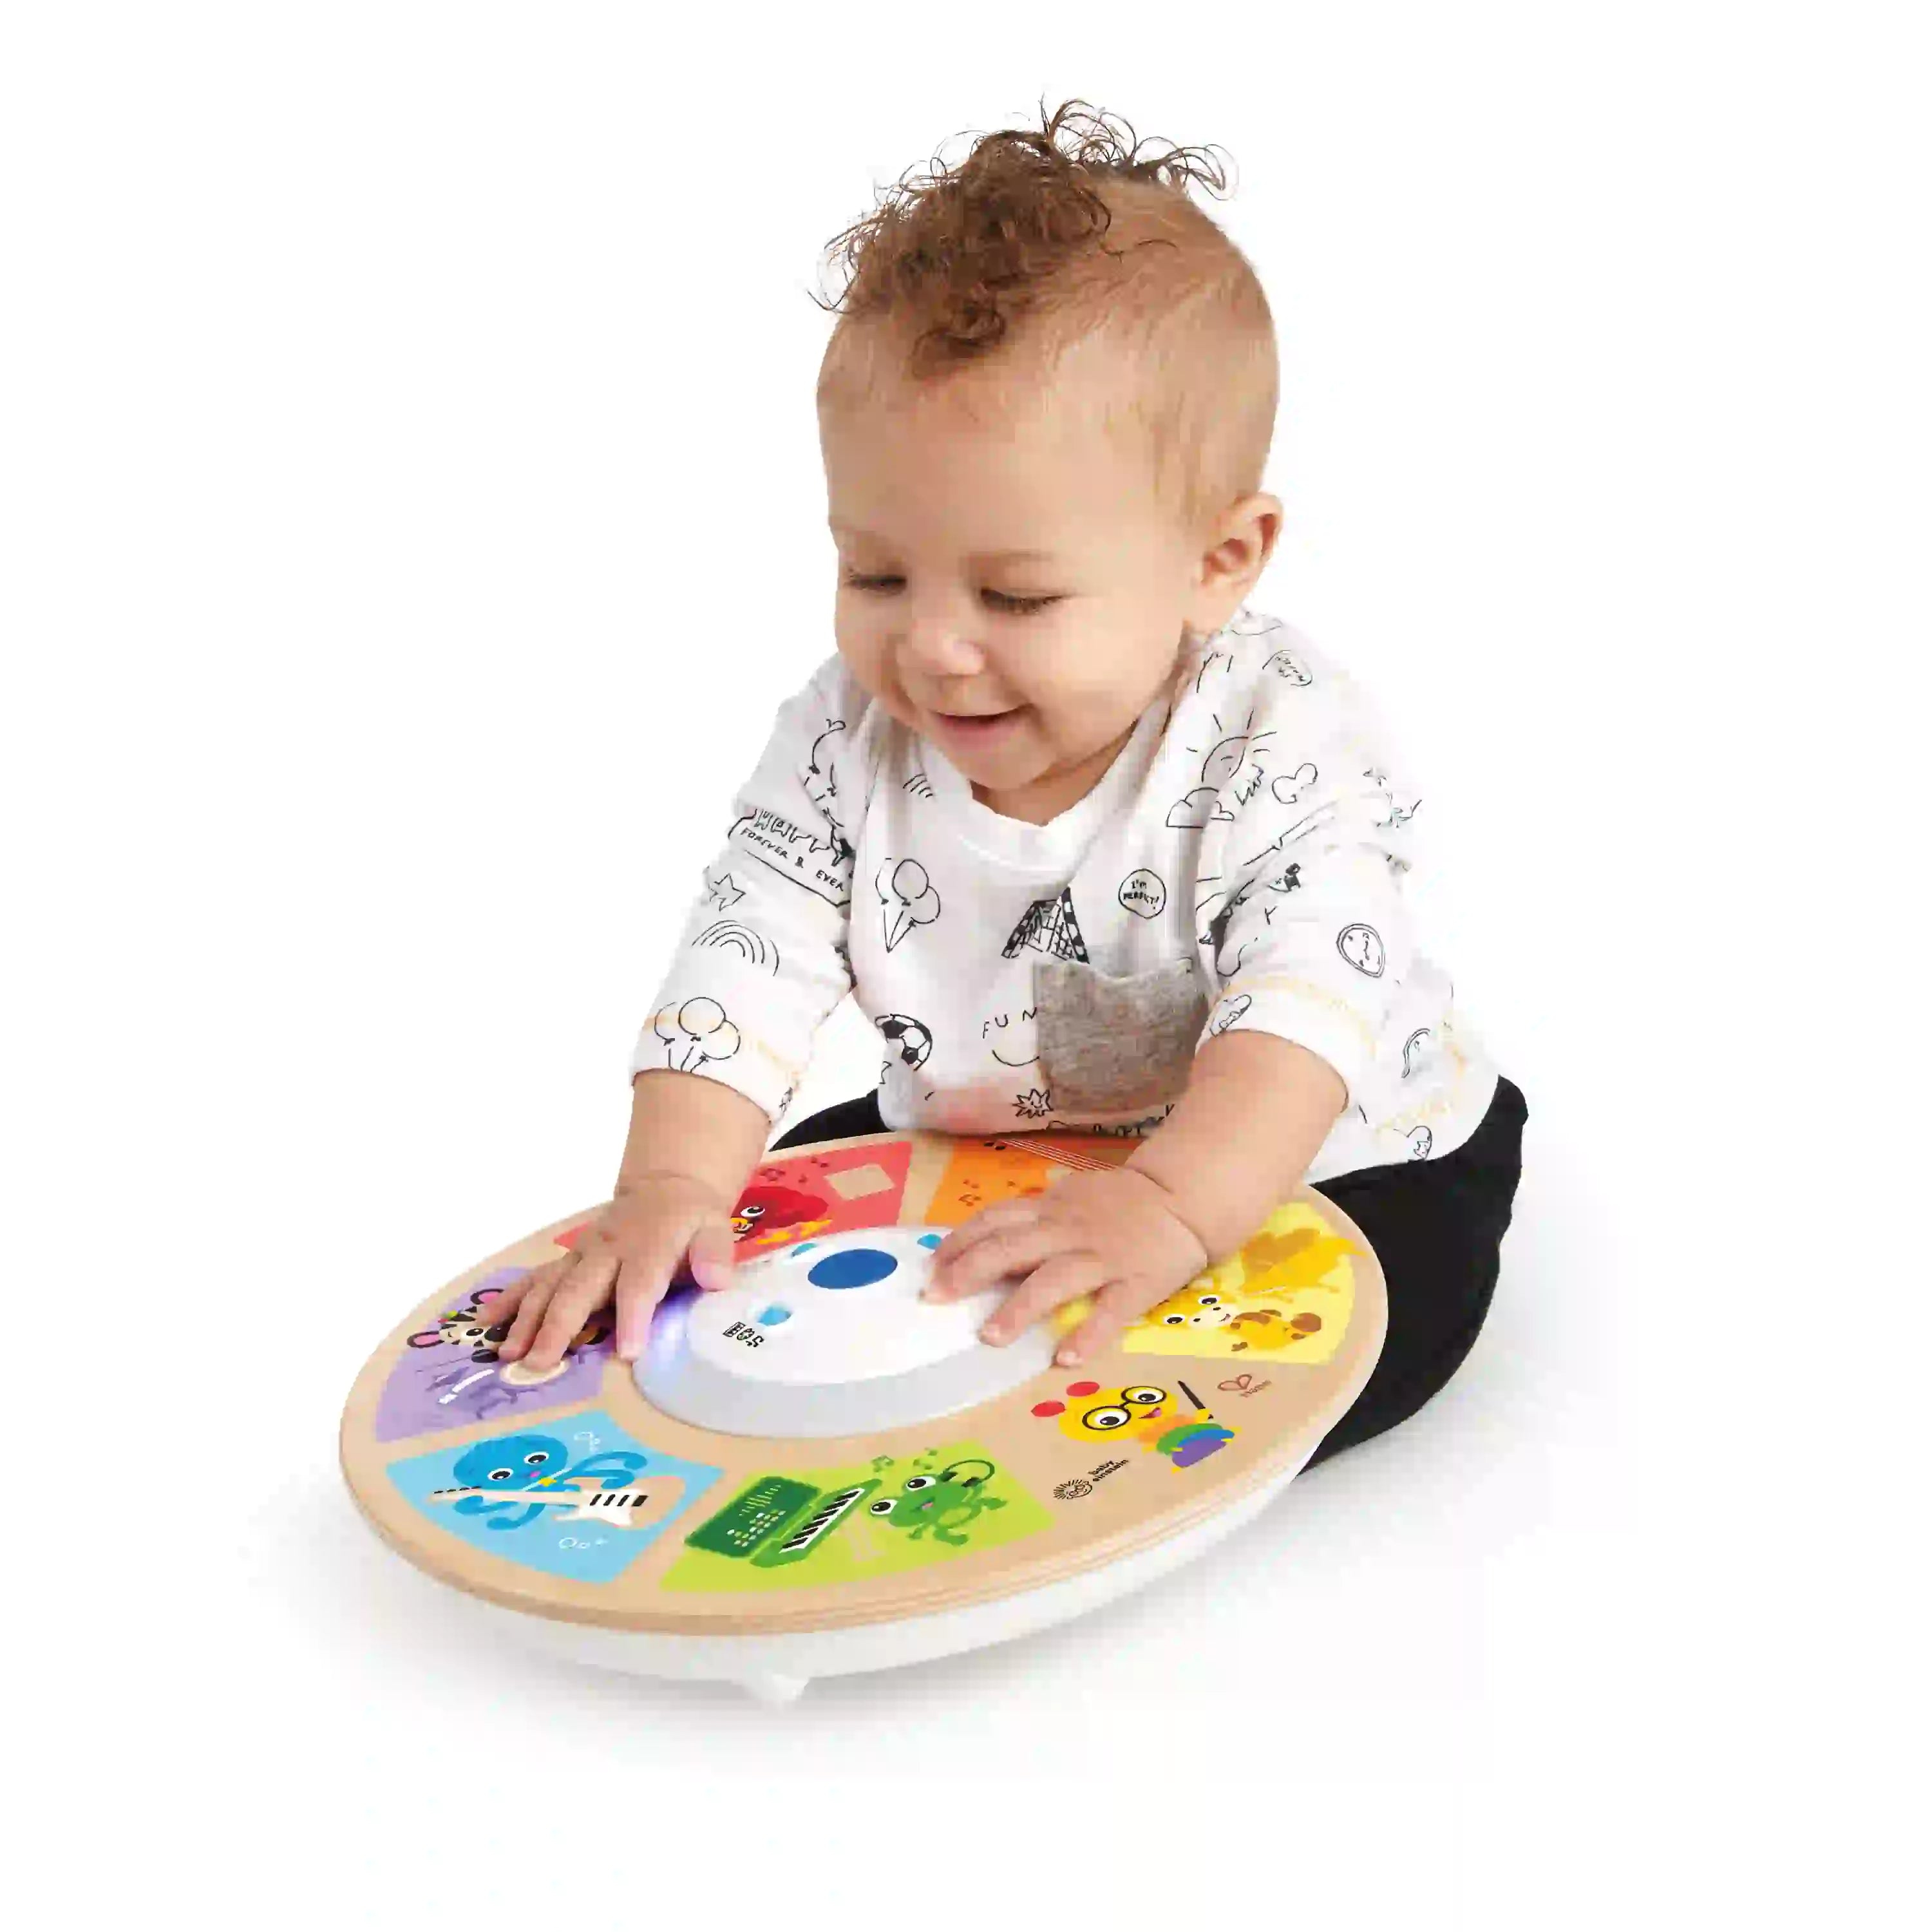 Cal's Smart Sounds Symphony Magic Touch Electronic Activity Toy